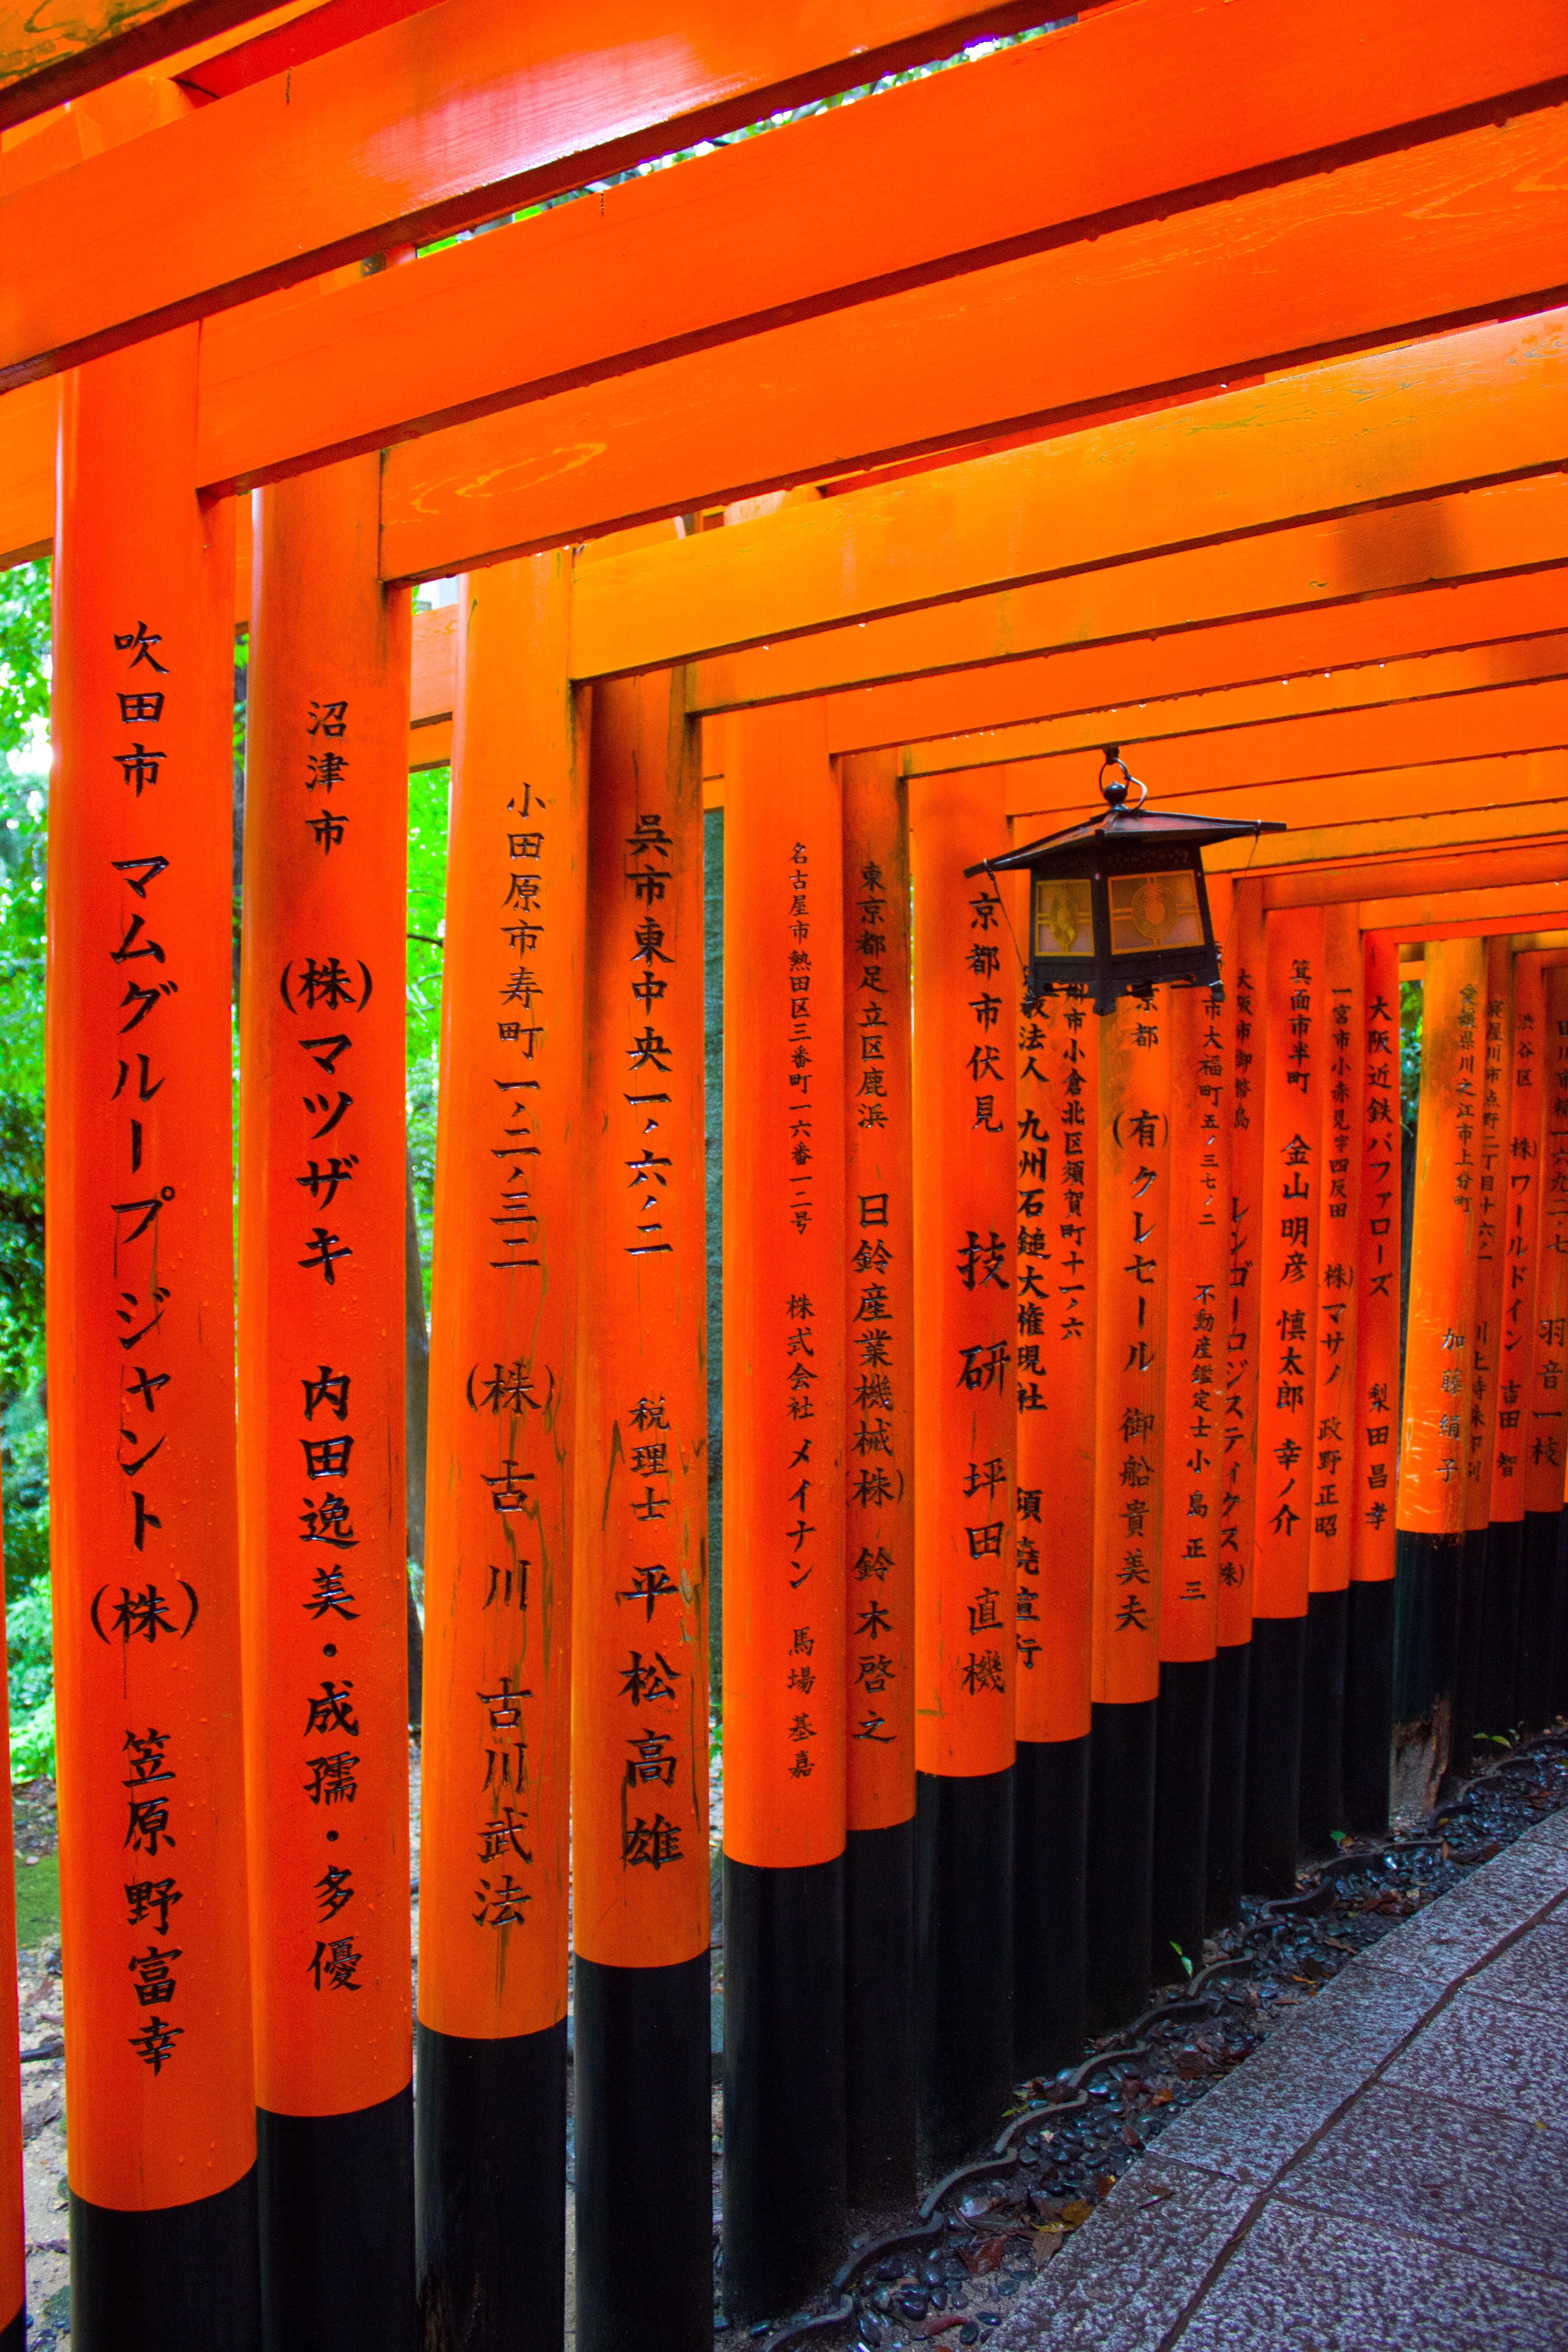 8 Days In Japan Changed My Life And It Ll Change Yours Too By Lienette Medium